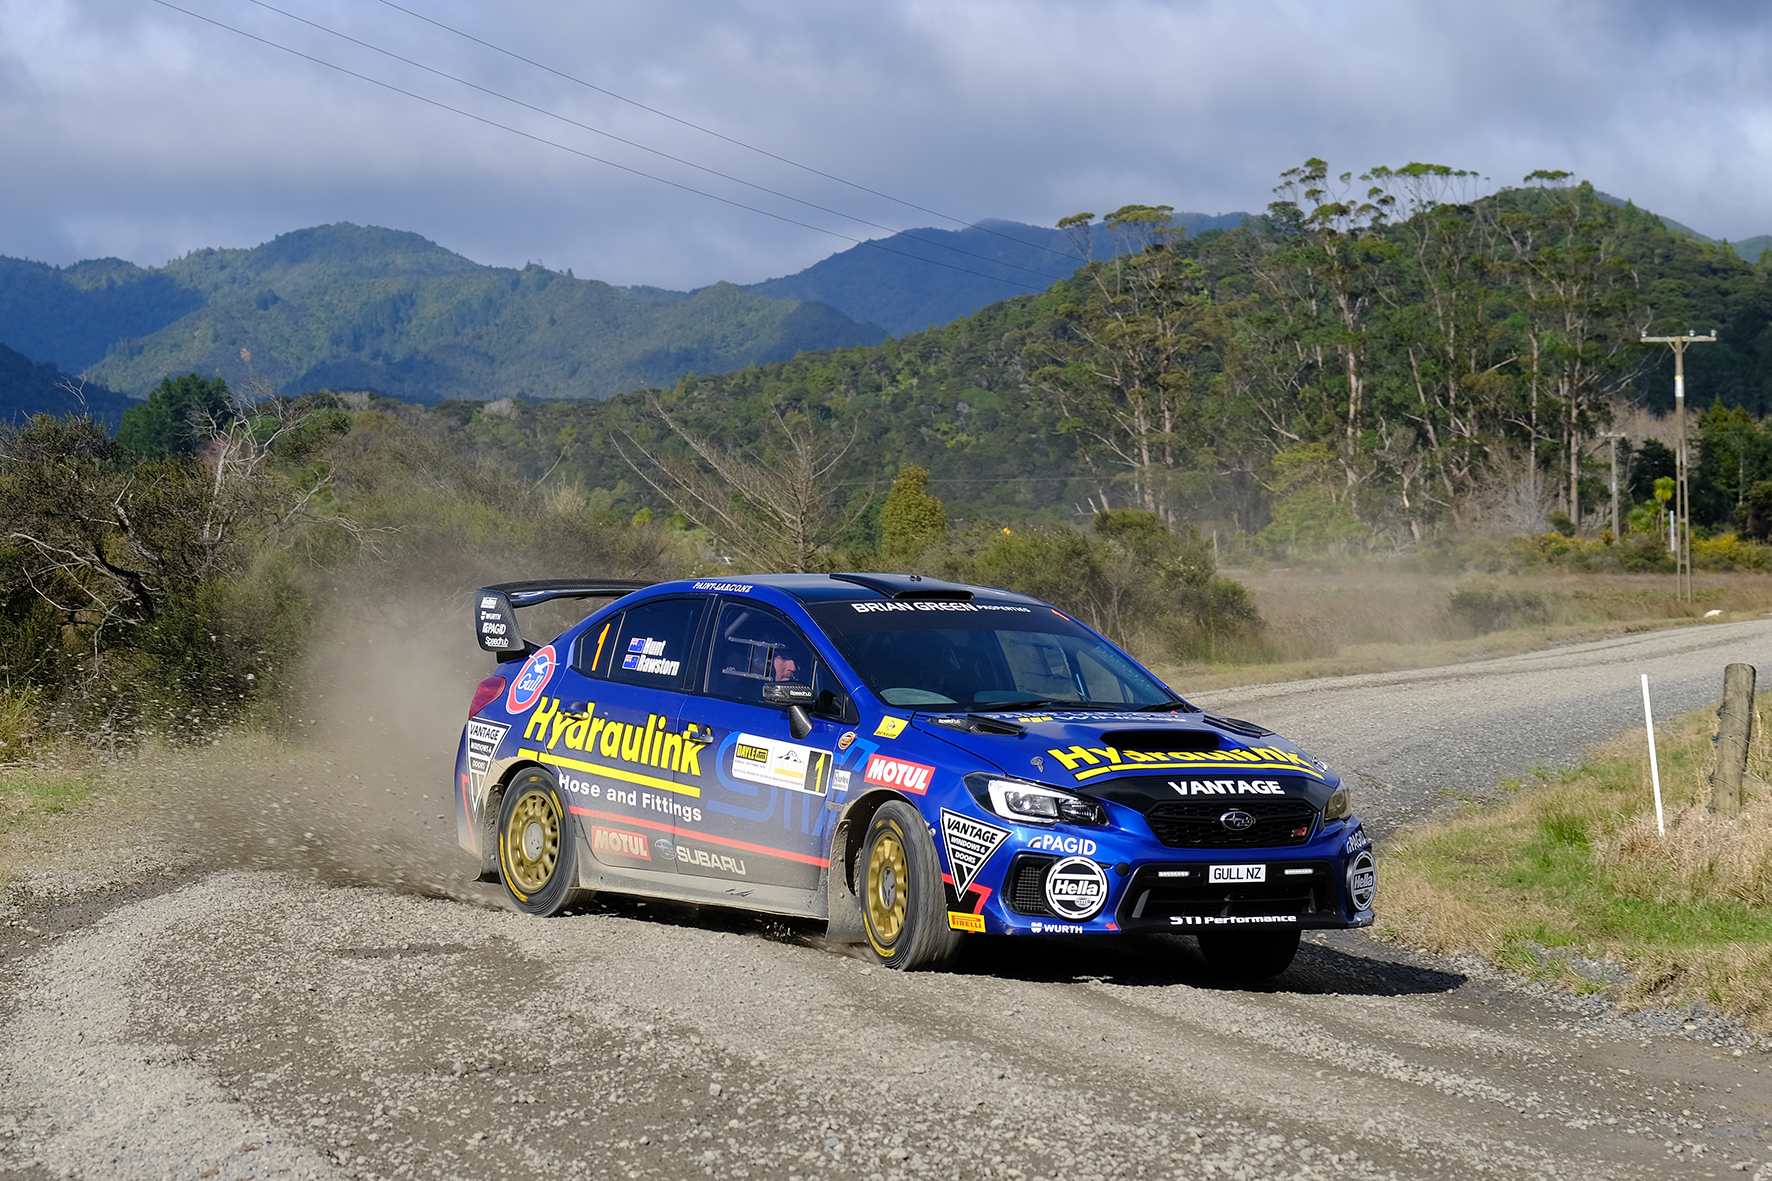 Ben Hunt won the New Zealand National Rally Championship in 2019 after a stellar year. Photo Credit: Geoff Ridder